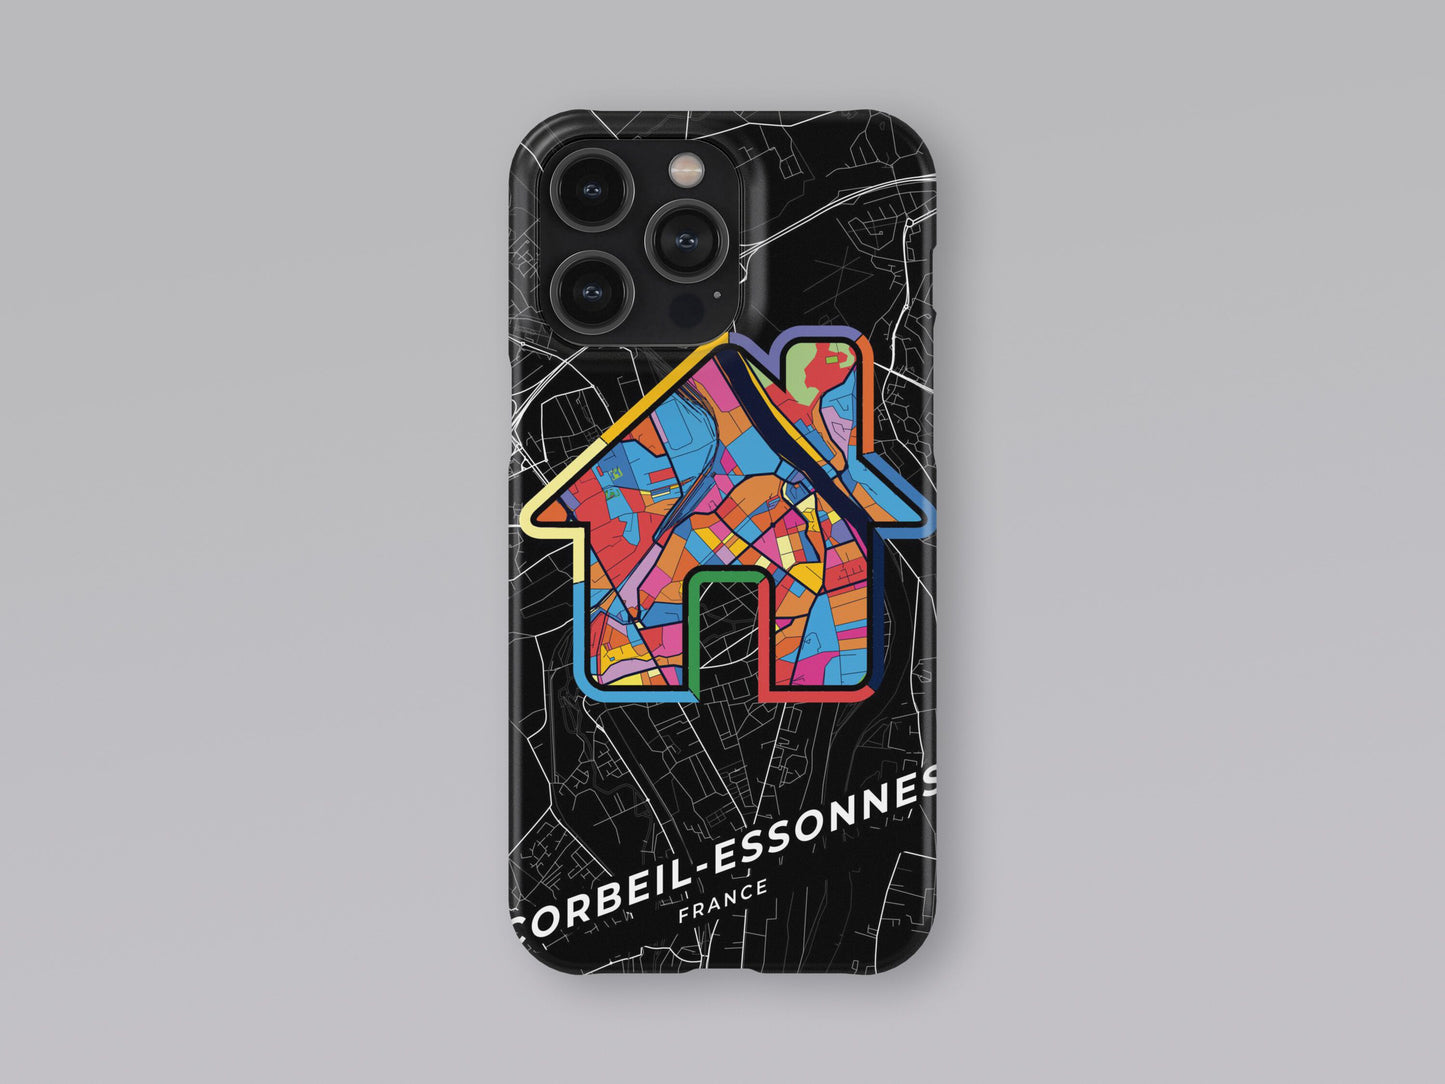 Corbeil-Essonnes France slim phone case with colorful icon. Birthday, wedding or housewarming gift. Couple match cases. 3